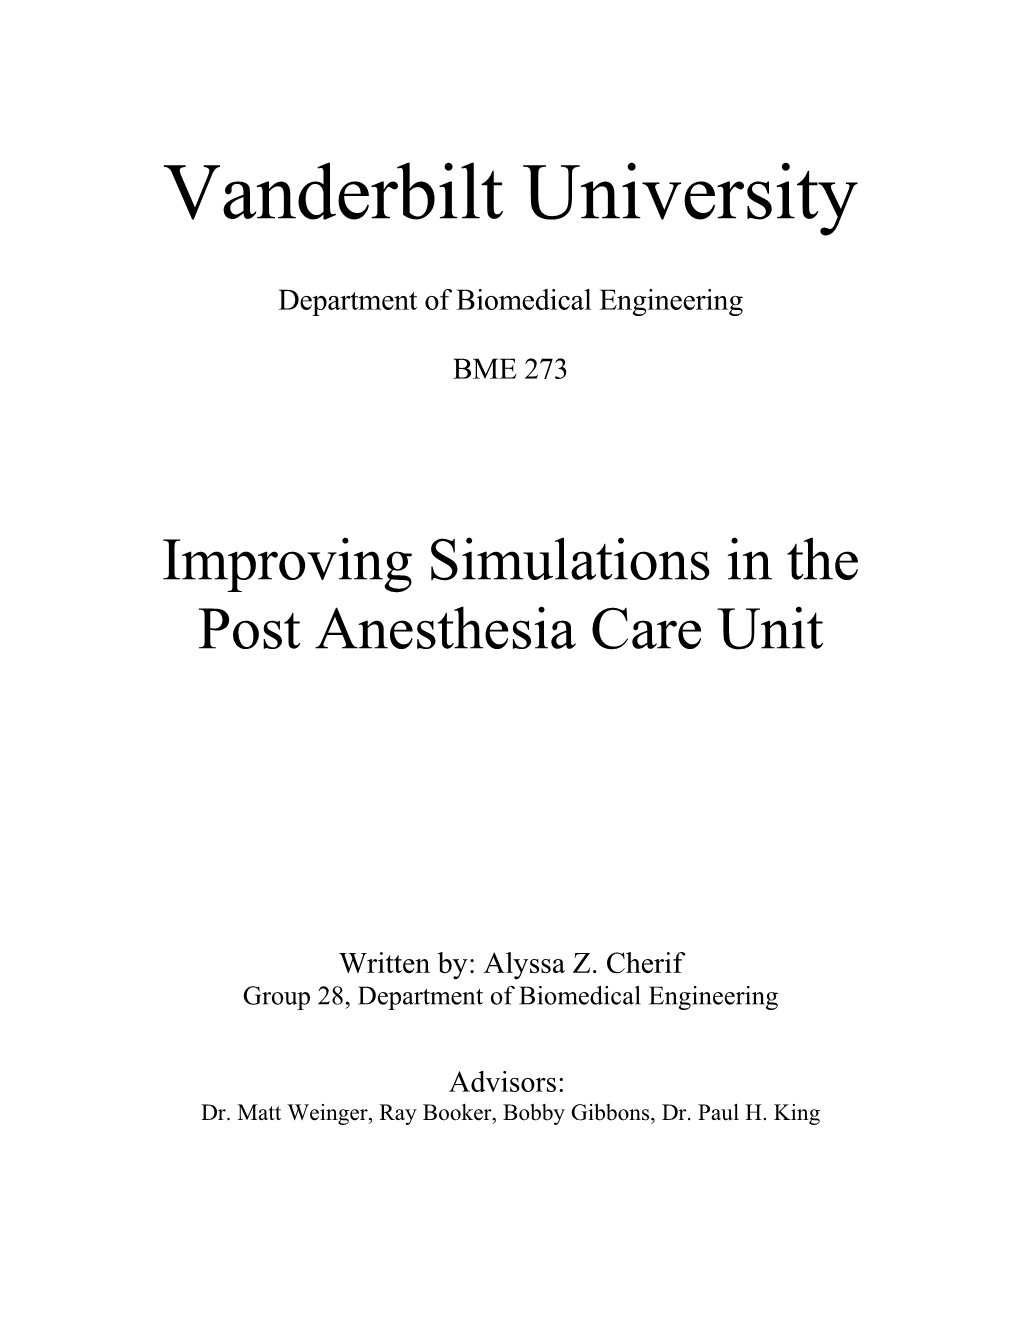 Improving Simulations in the Post Anesthesia Care Unit